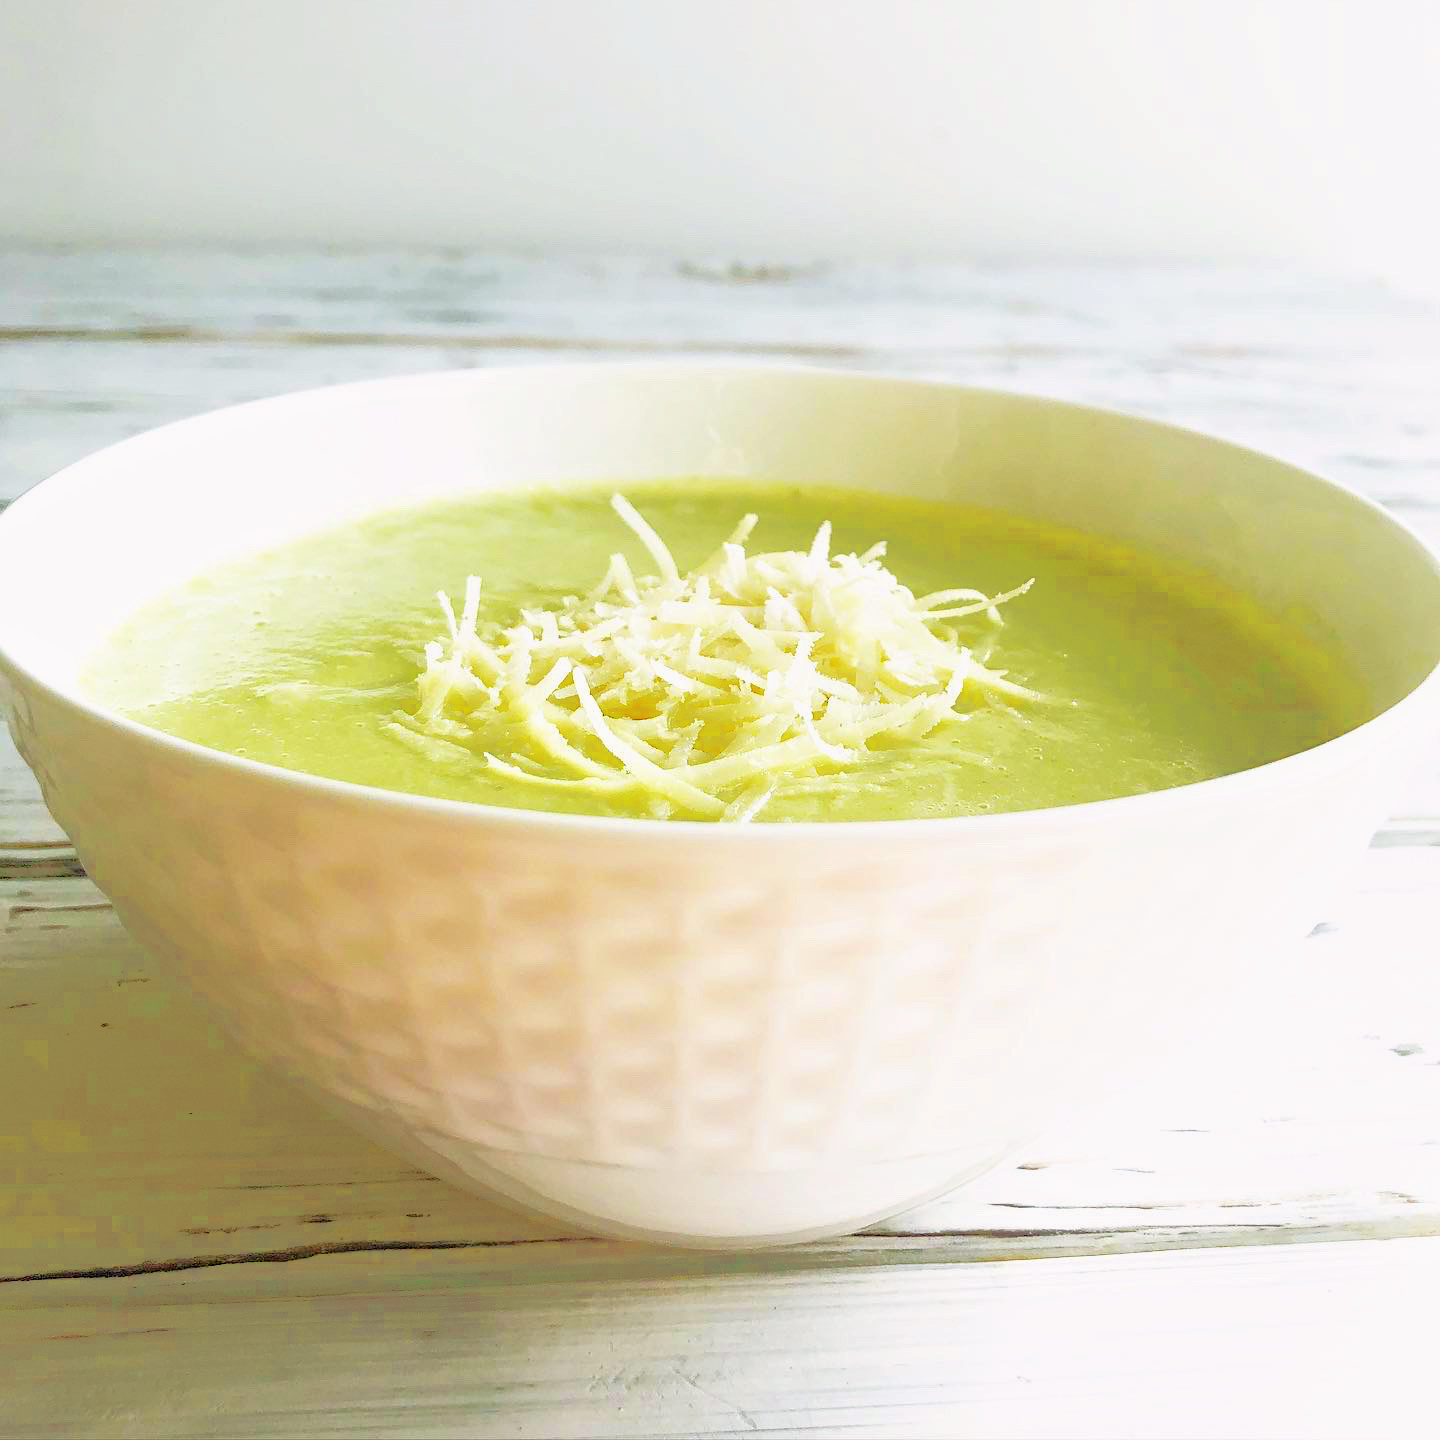 Vegan Broccoli and Parmesan Soup - Quick and easy - Creamy without feeling heavy - Packed with good-for-you ingredients - Ready to serve in 30 minutes or less! via @thiswifecooks